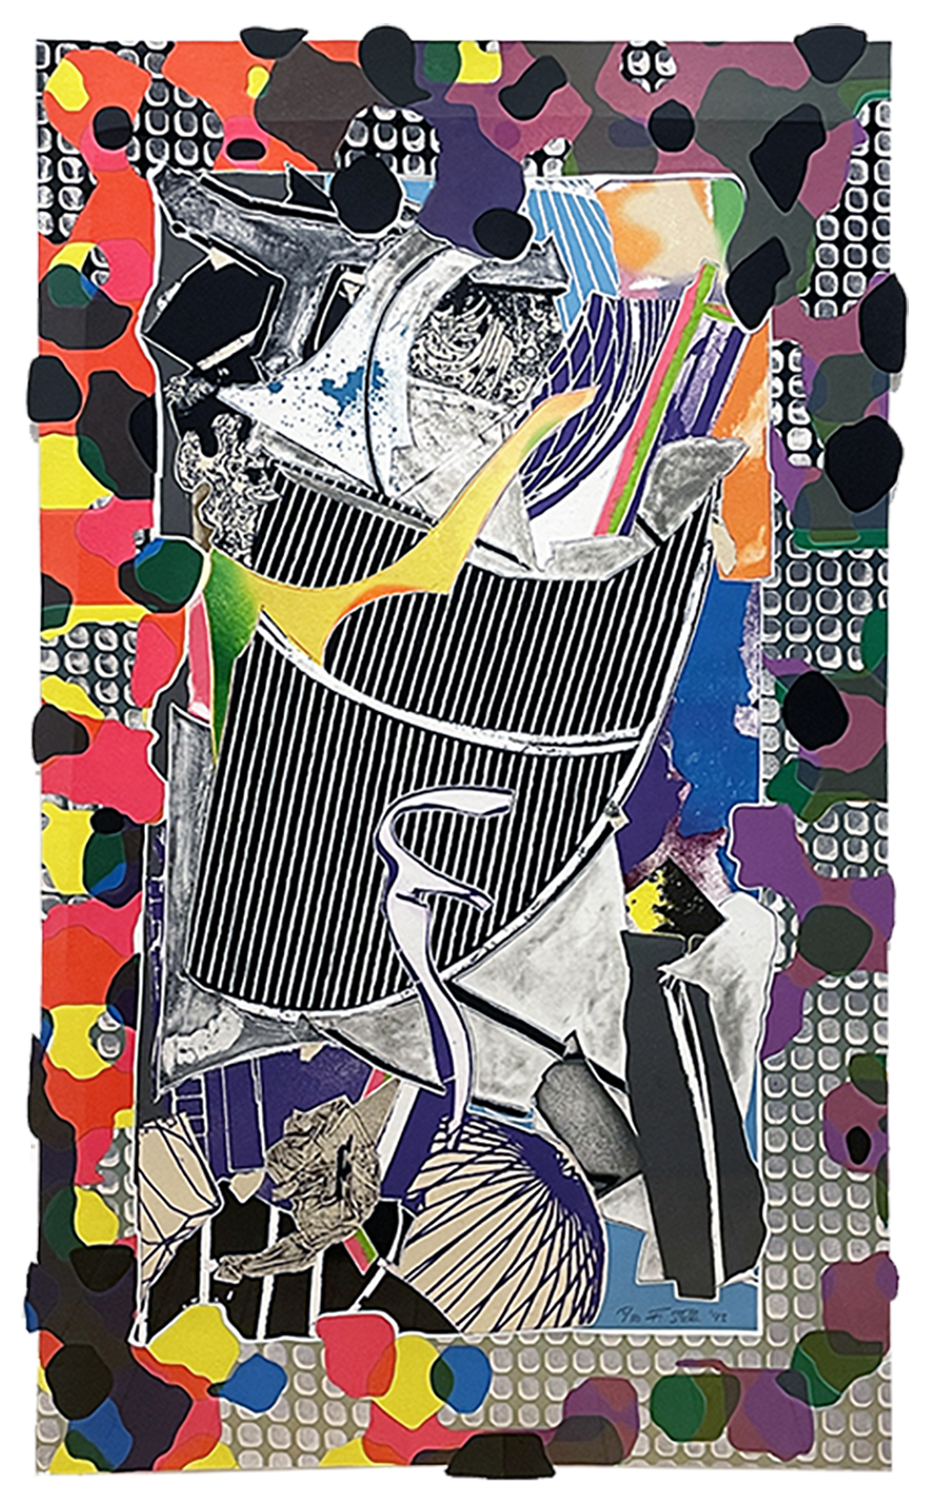 Frank Stella multicolor abstract print entitled "The Battering Ram" cropped